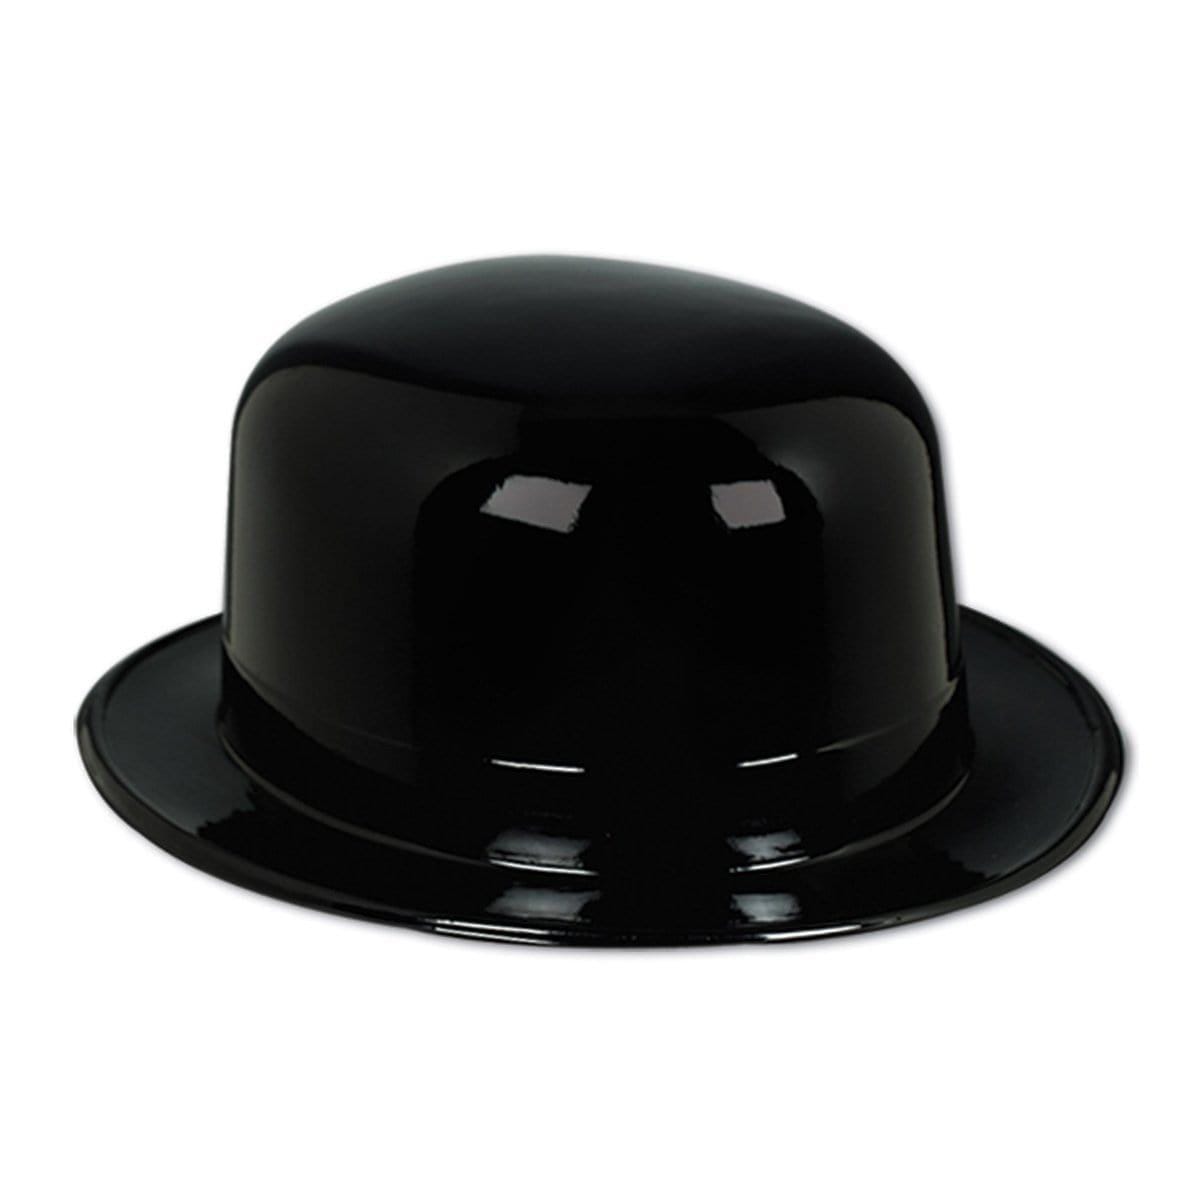 Buy Costume Accessories Black plastic derby hat for adults sold at Party Expert